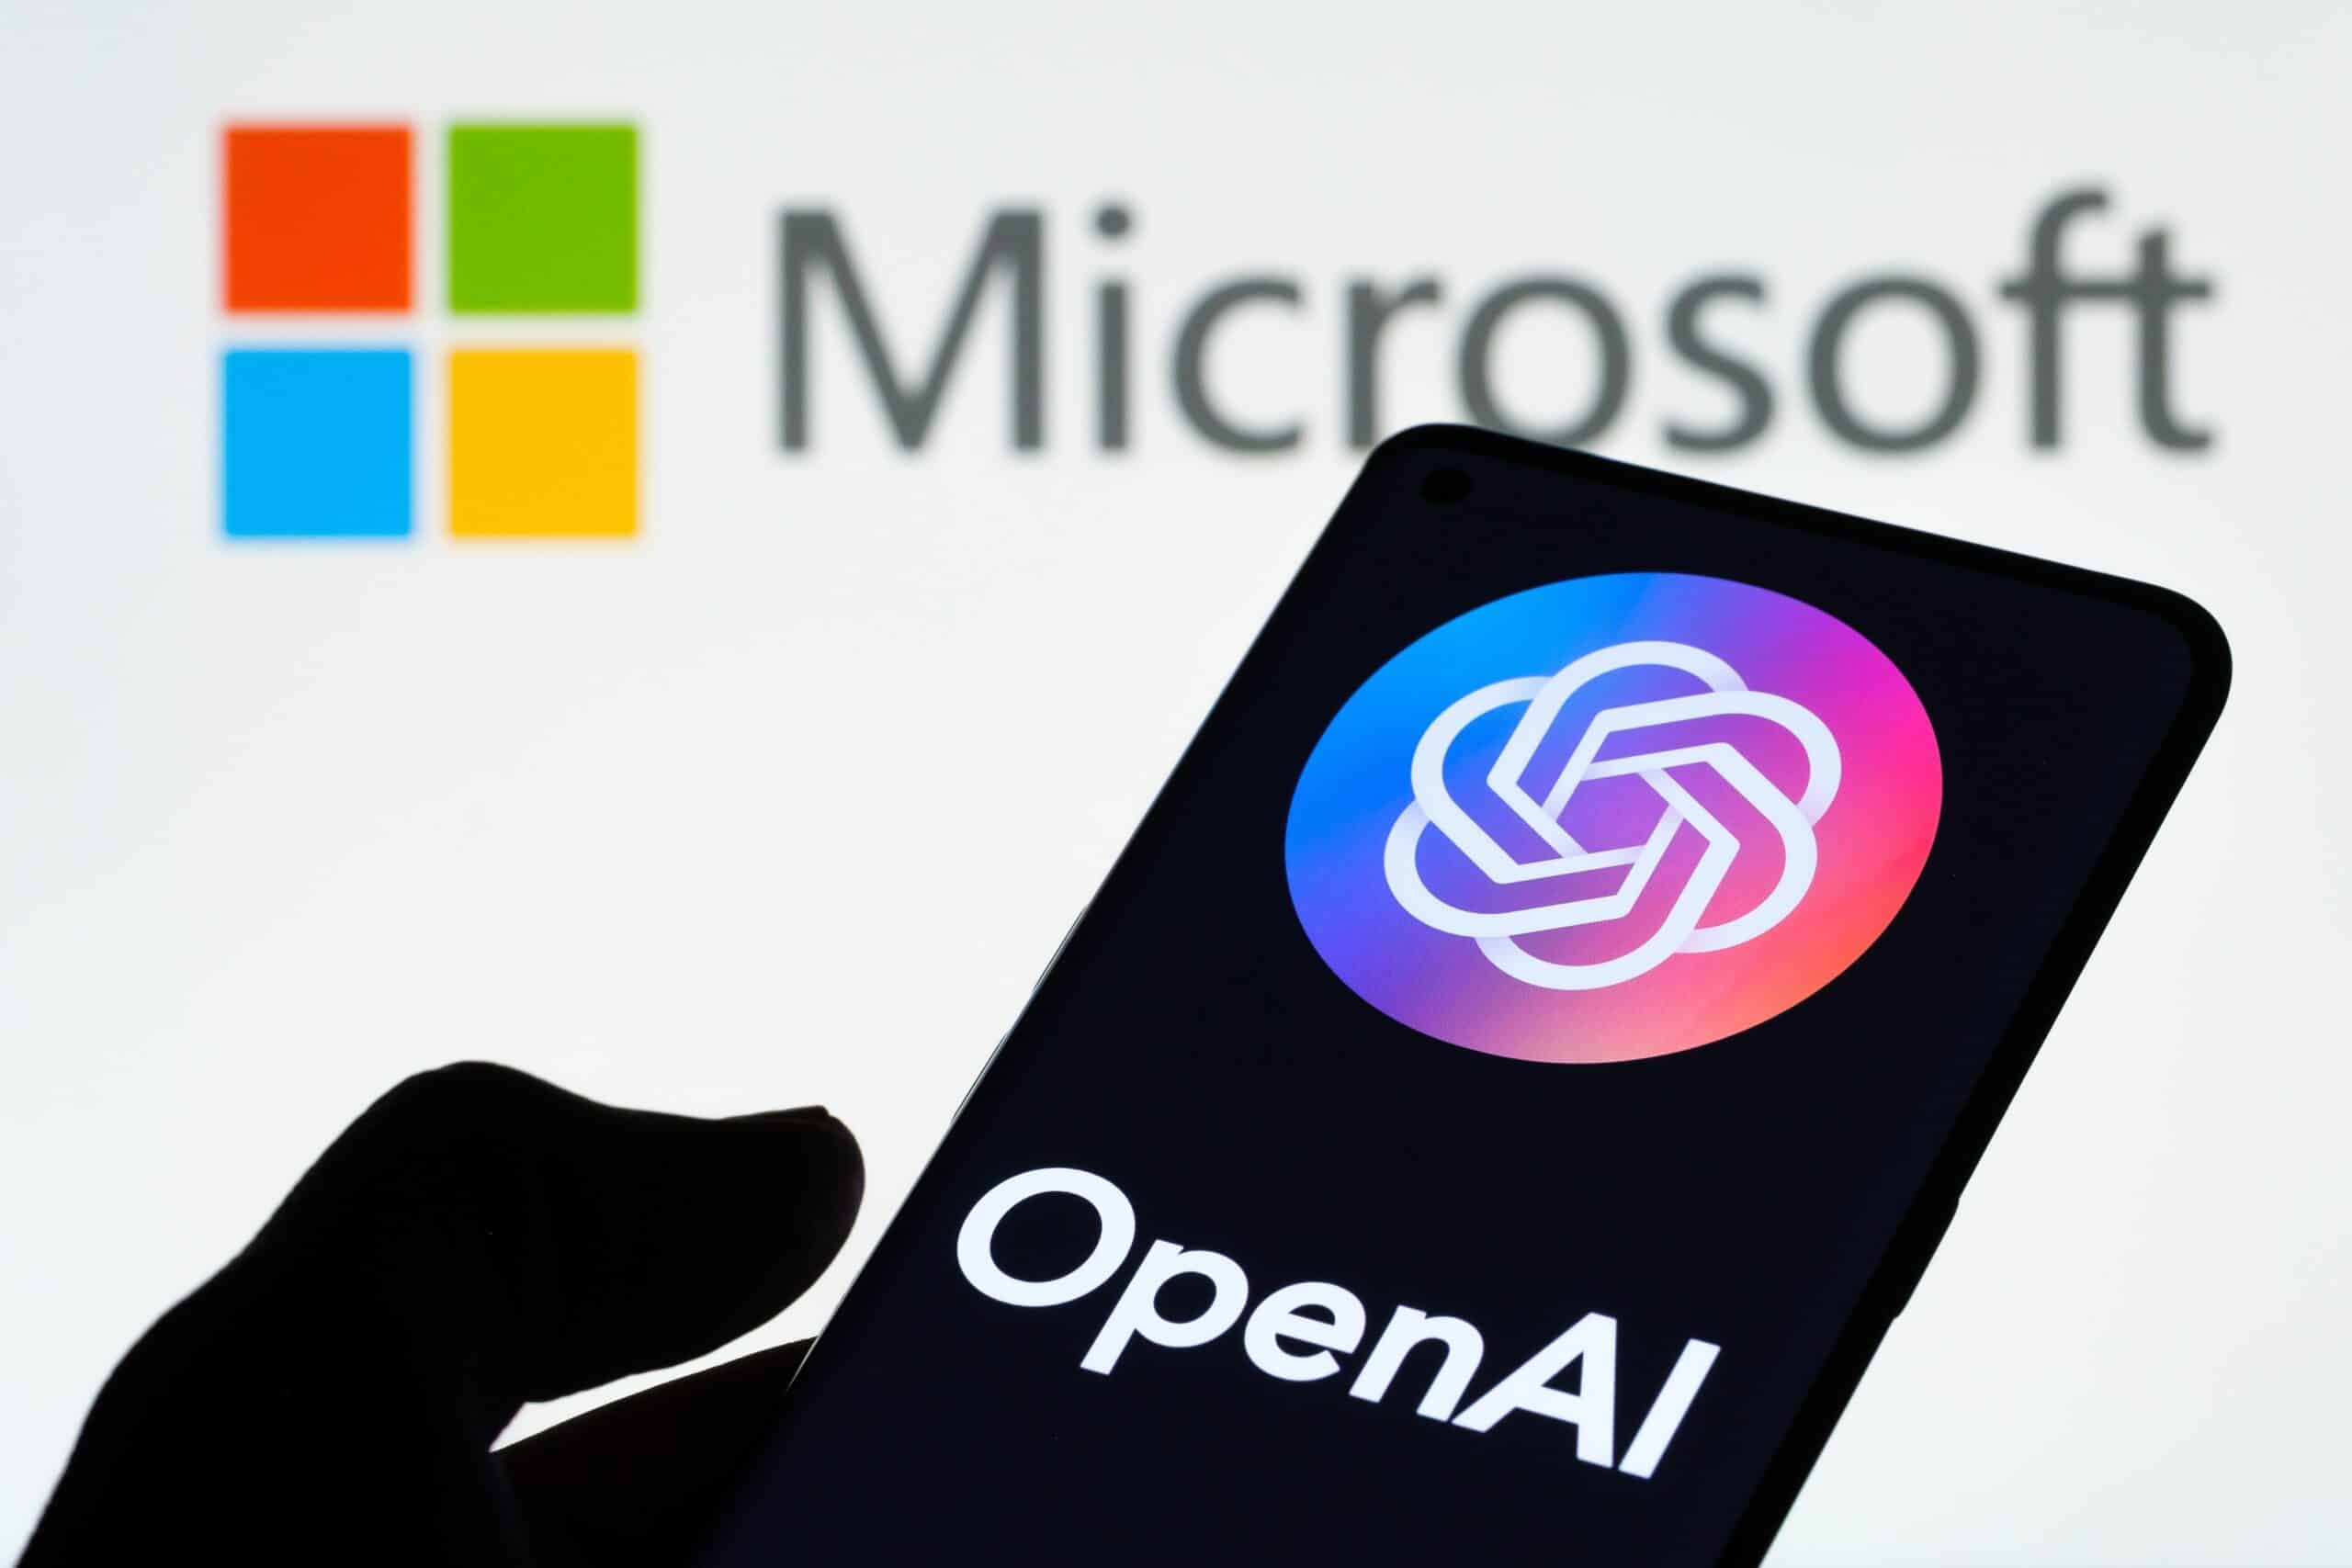 The New York Times Takes Legal Action Against OpenAI and Microsoft